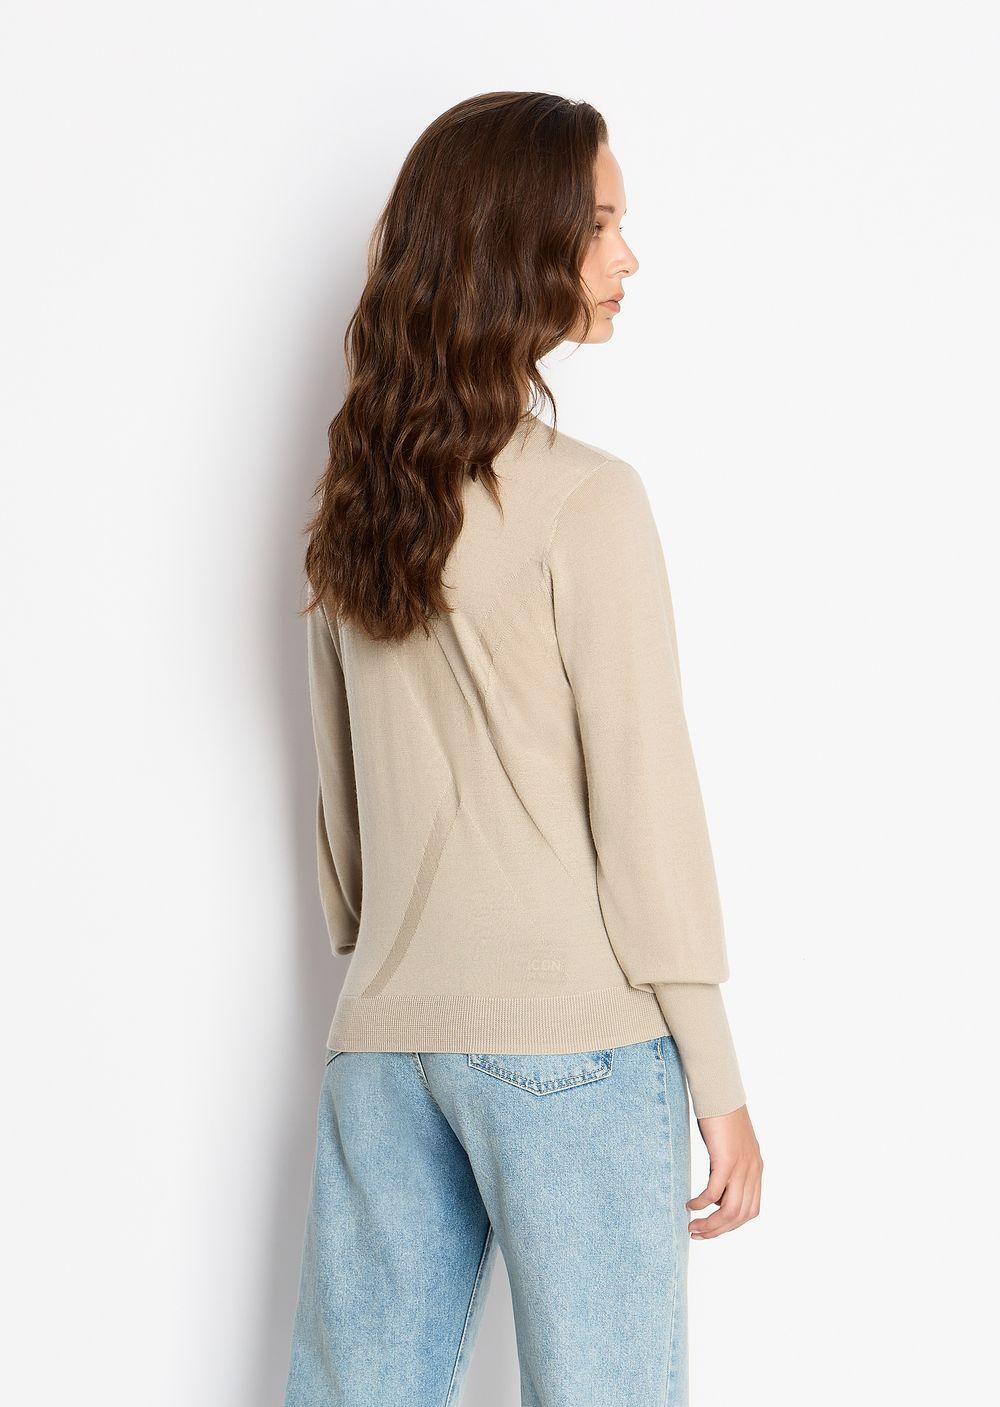 Armani Exchange Knitted Merino Wool Crew Neck Sweater in Natural | Lyst